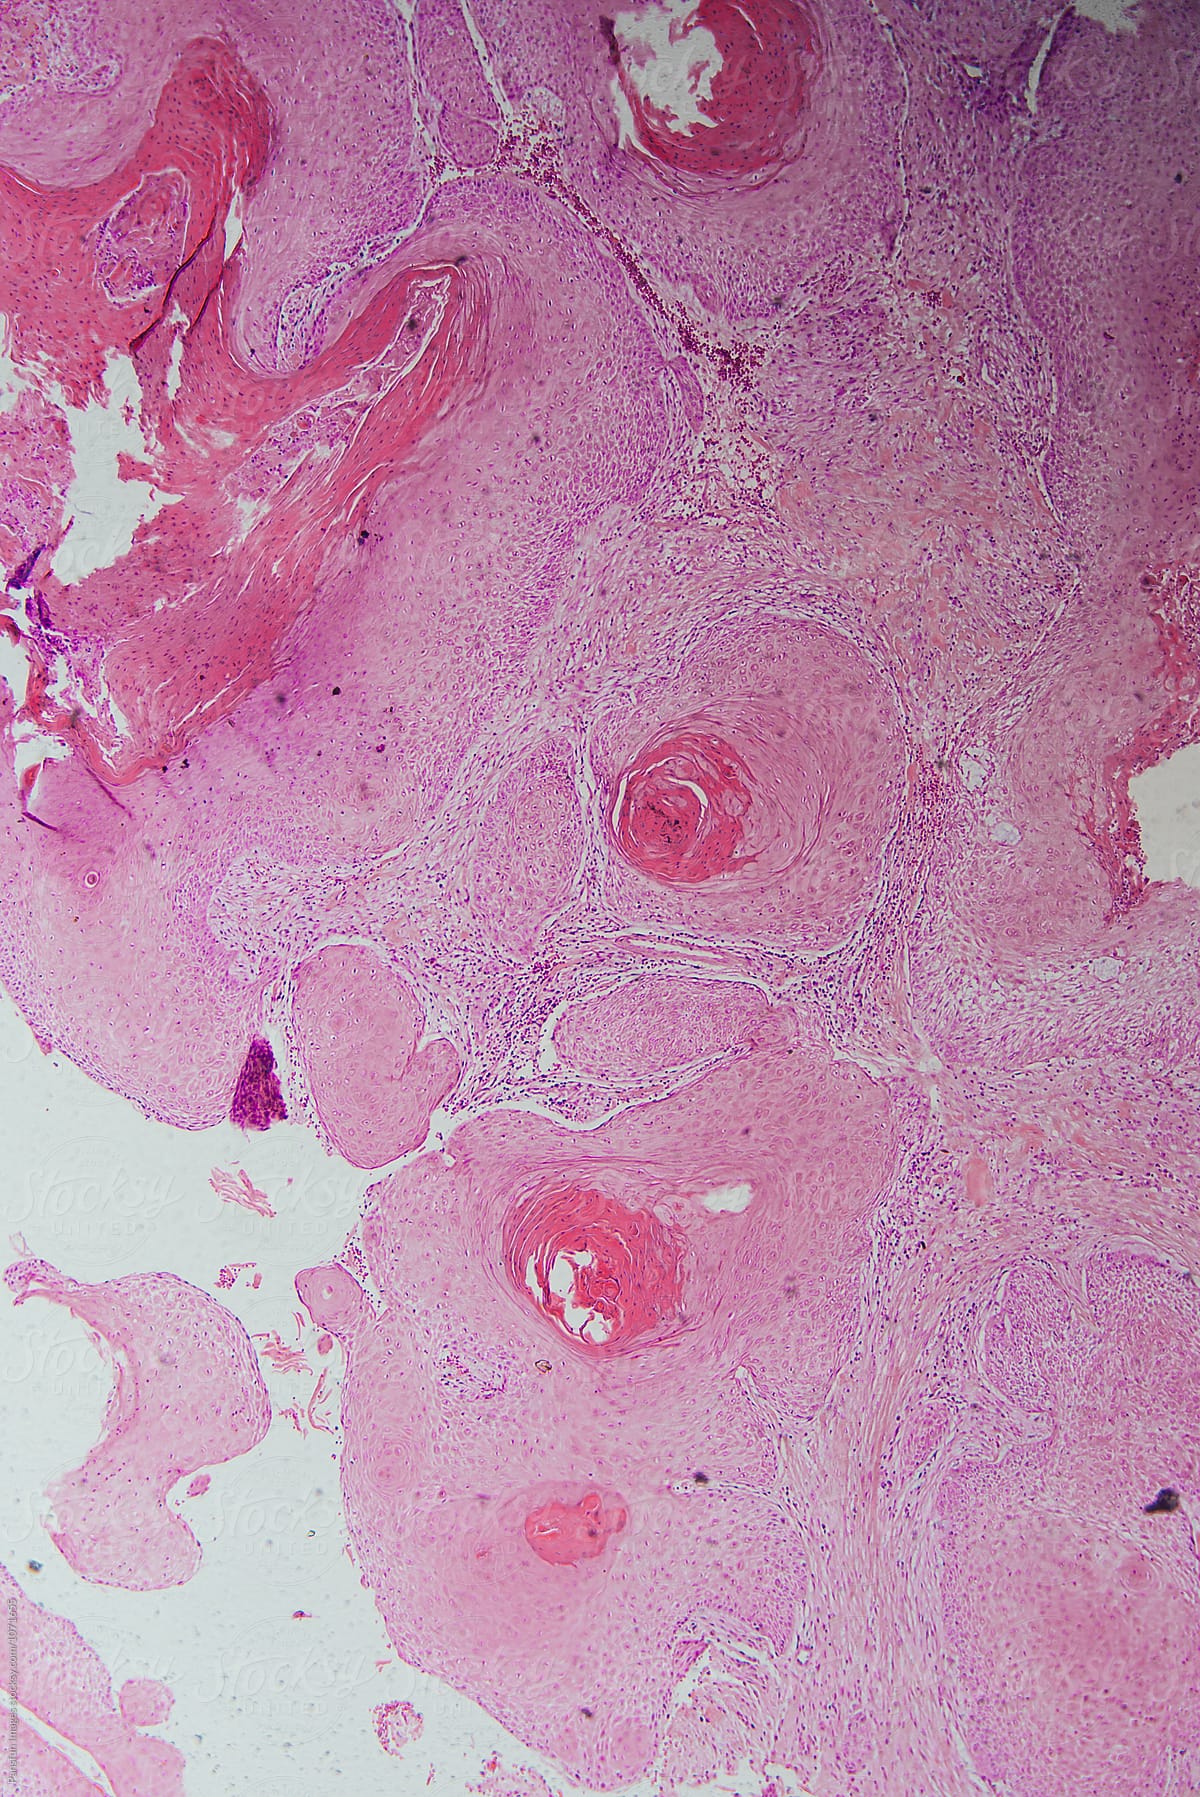 human cells, well differentiated squamous cell carcinomas